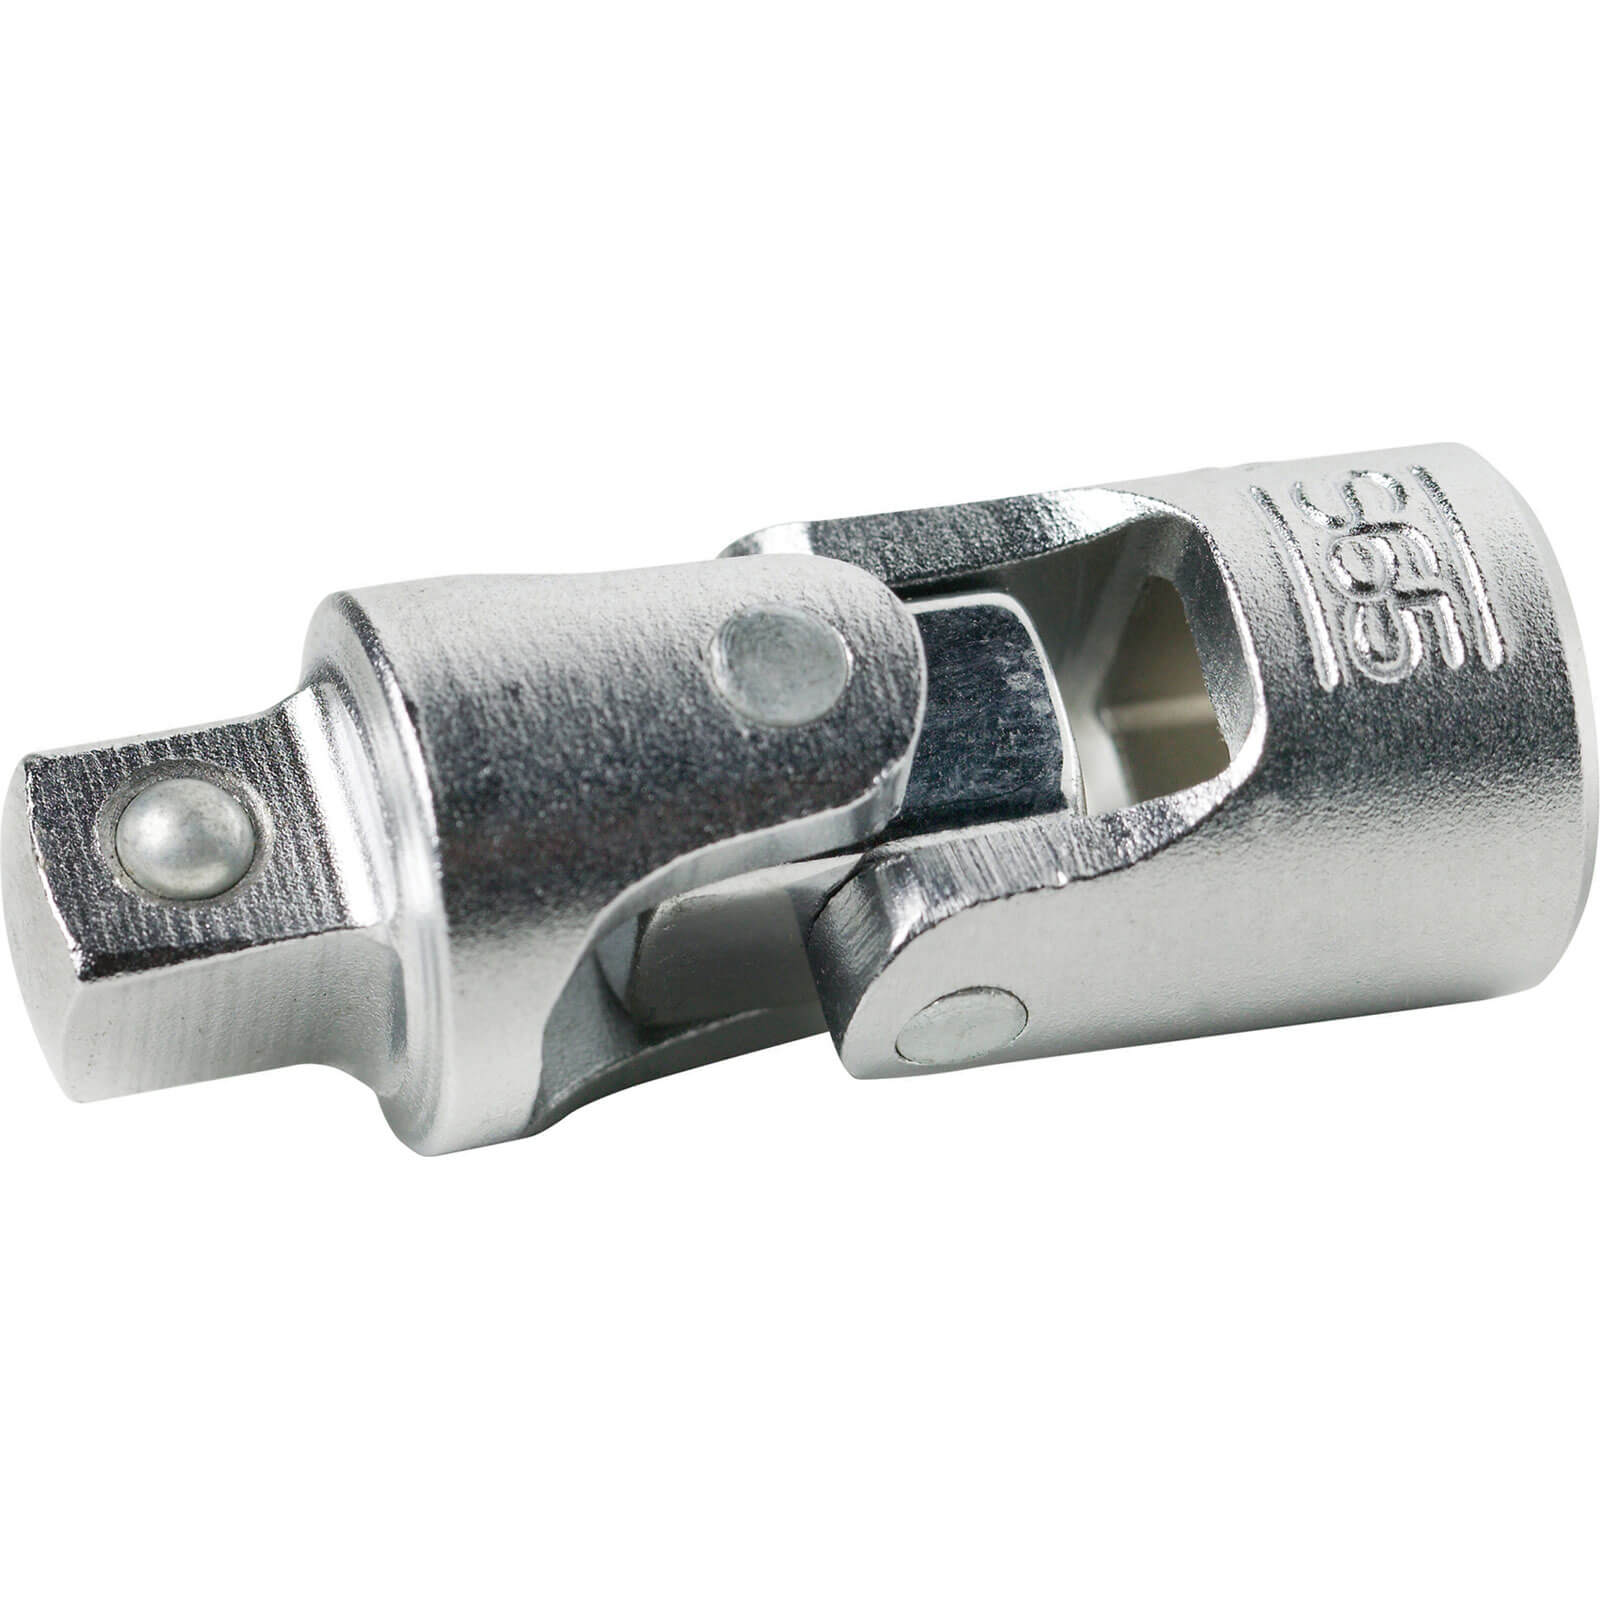 Image of Bahco Universal Joint for 1/4" Sockets 1/4"